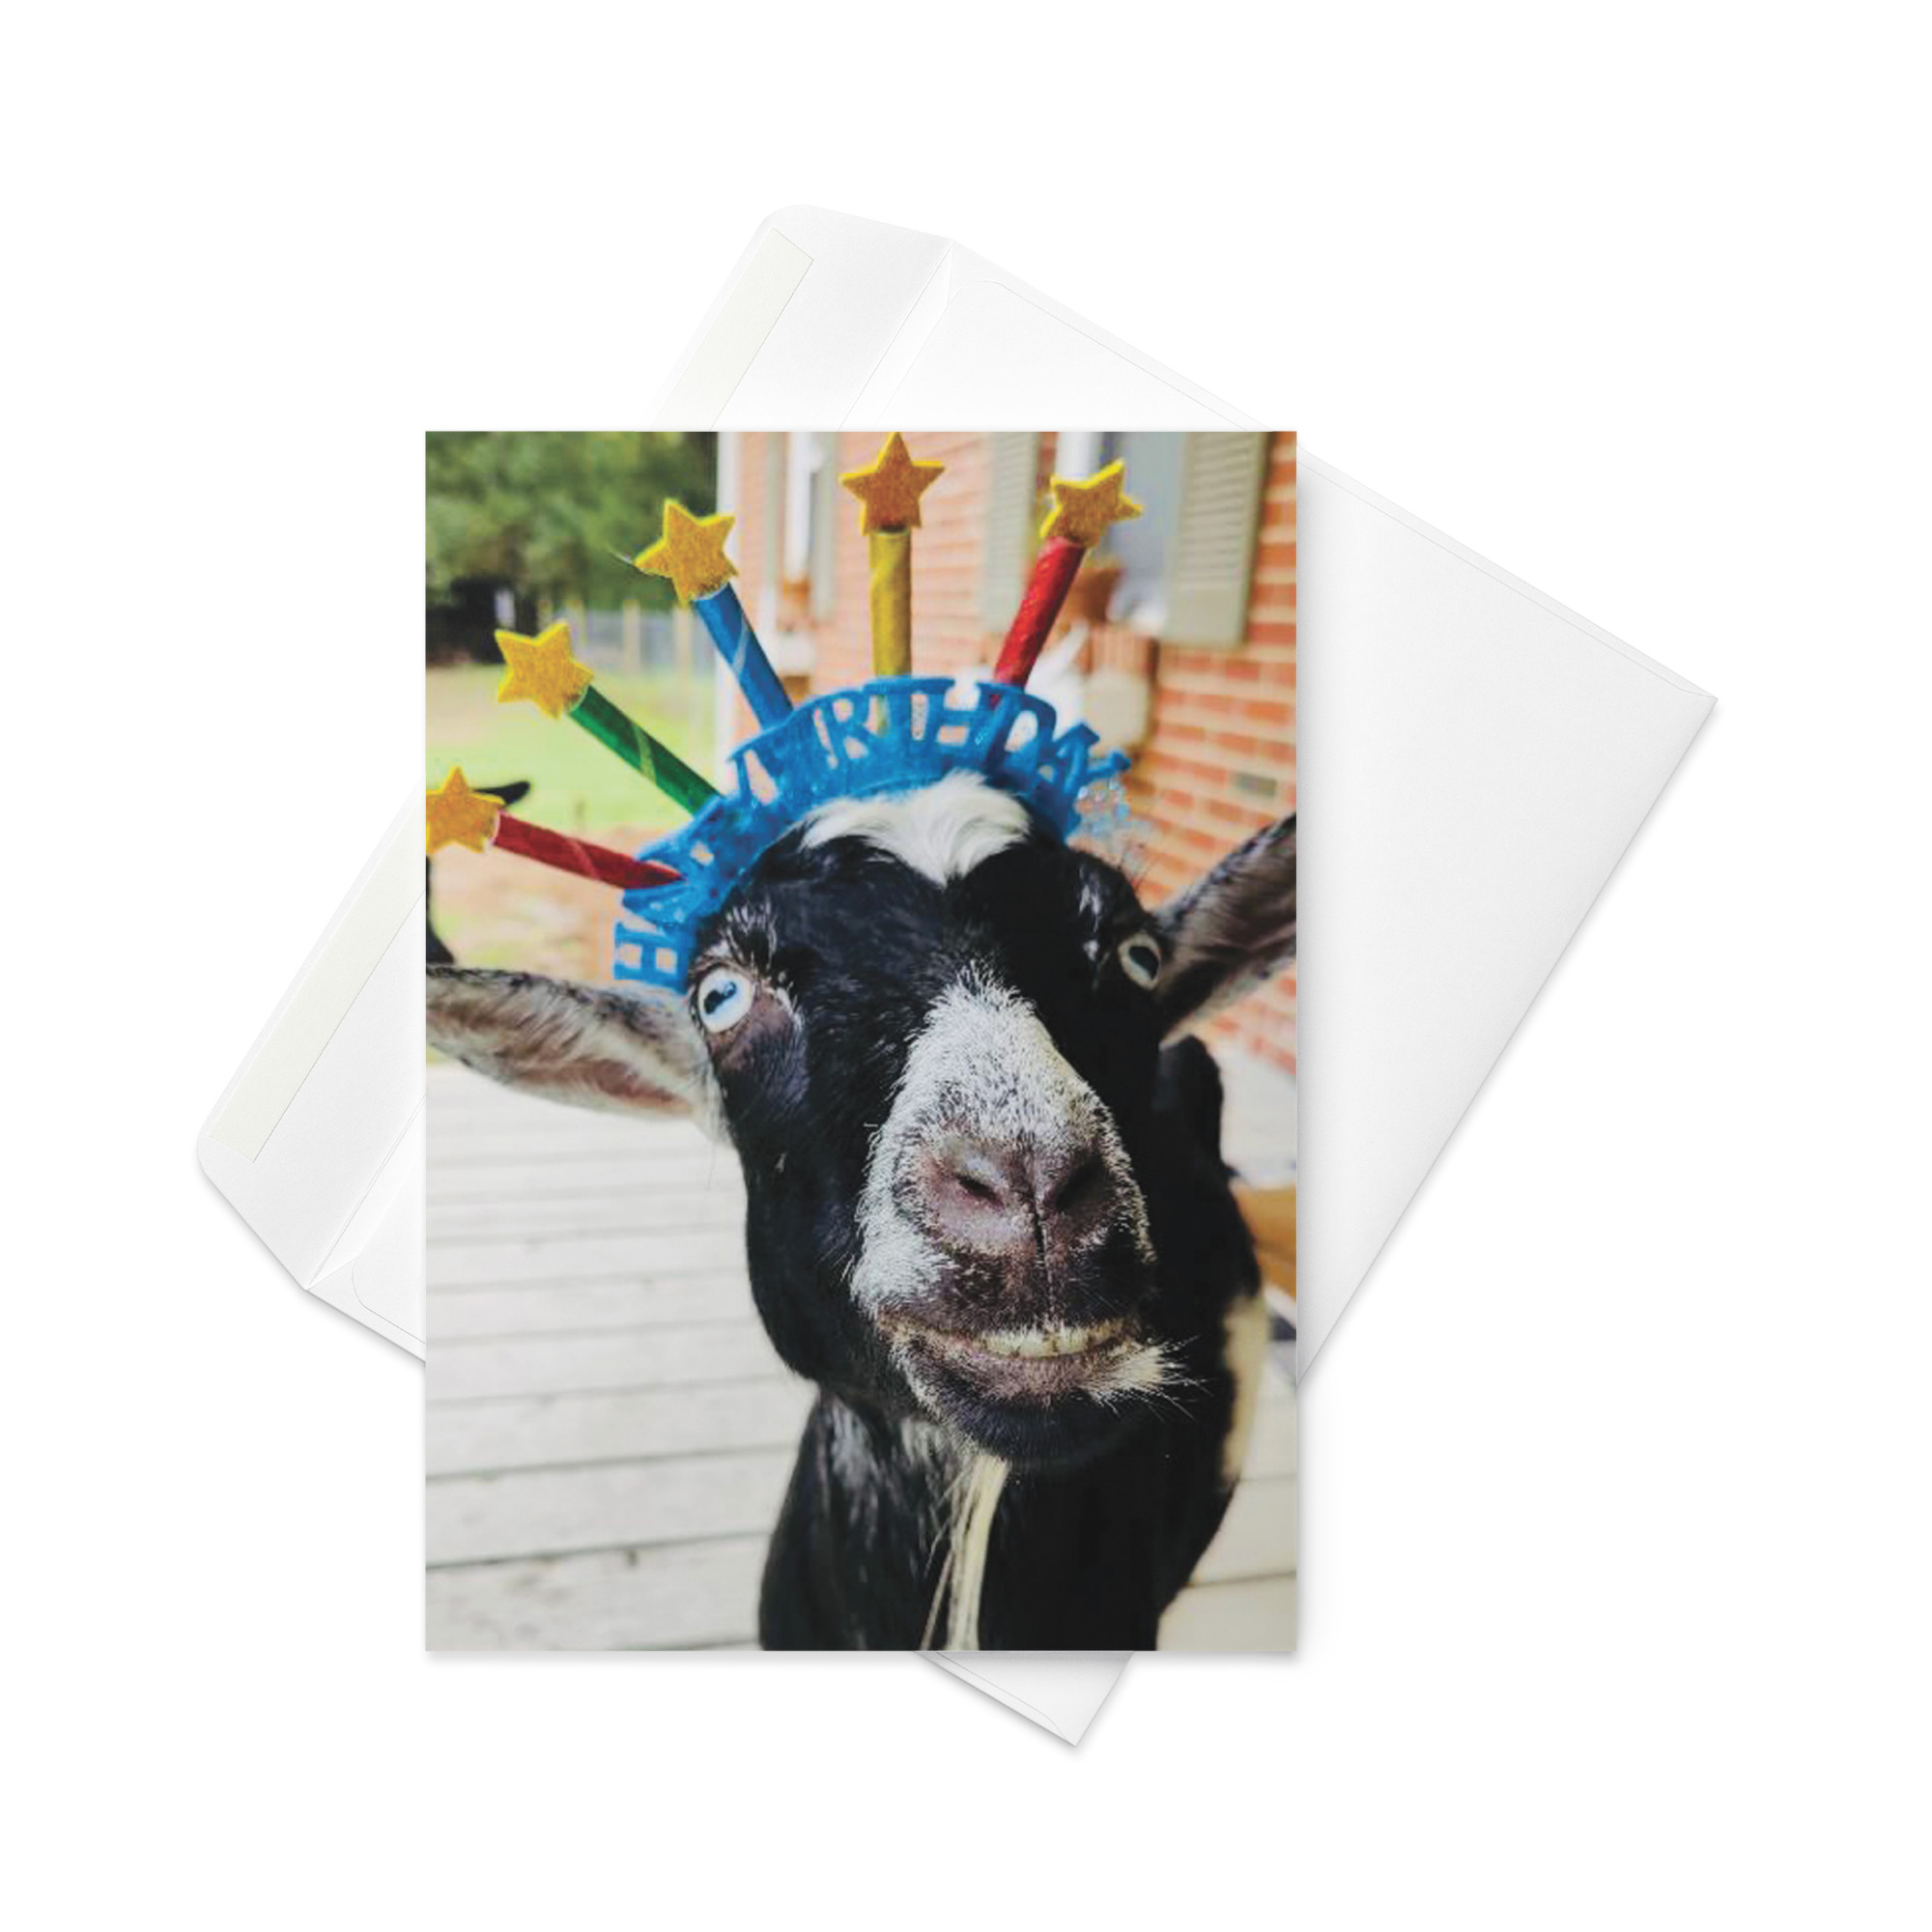 Goat Friend Greeting Card, Gifts With Goats, Printable Goat Birthday Card, Goat  Gifts for Goat Lovers, Funny Goat , Goat Stuff, Friend Card -  Canada